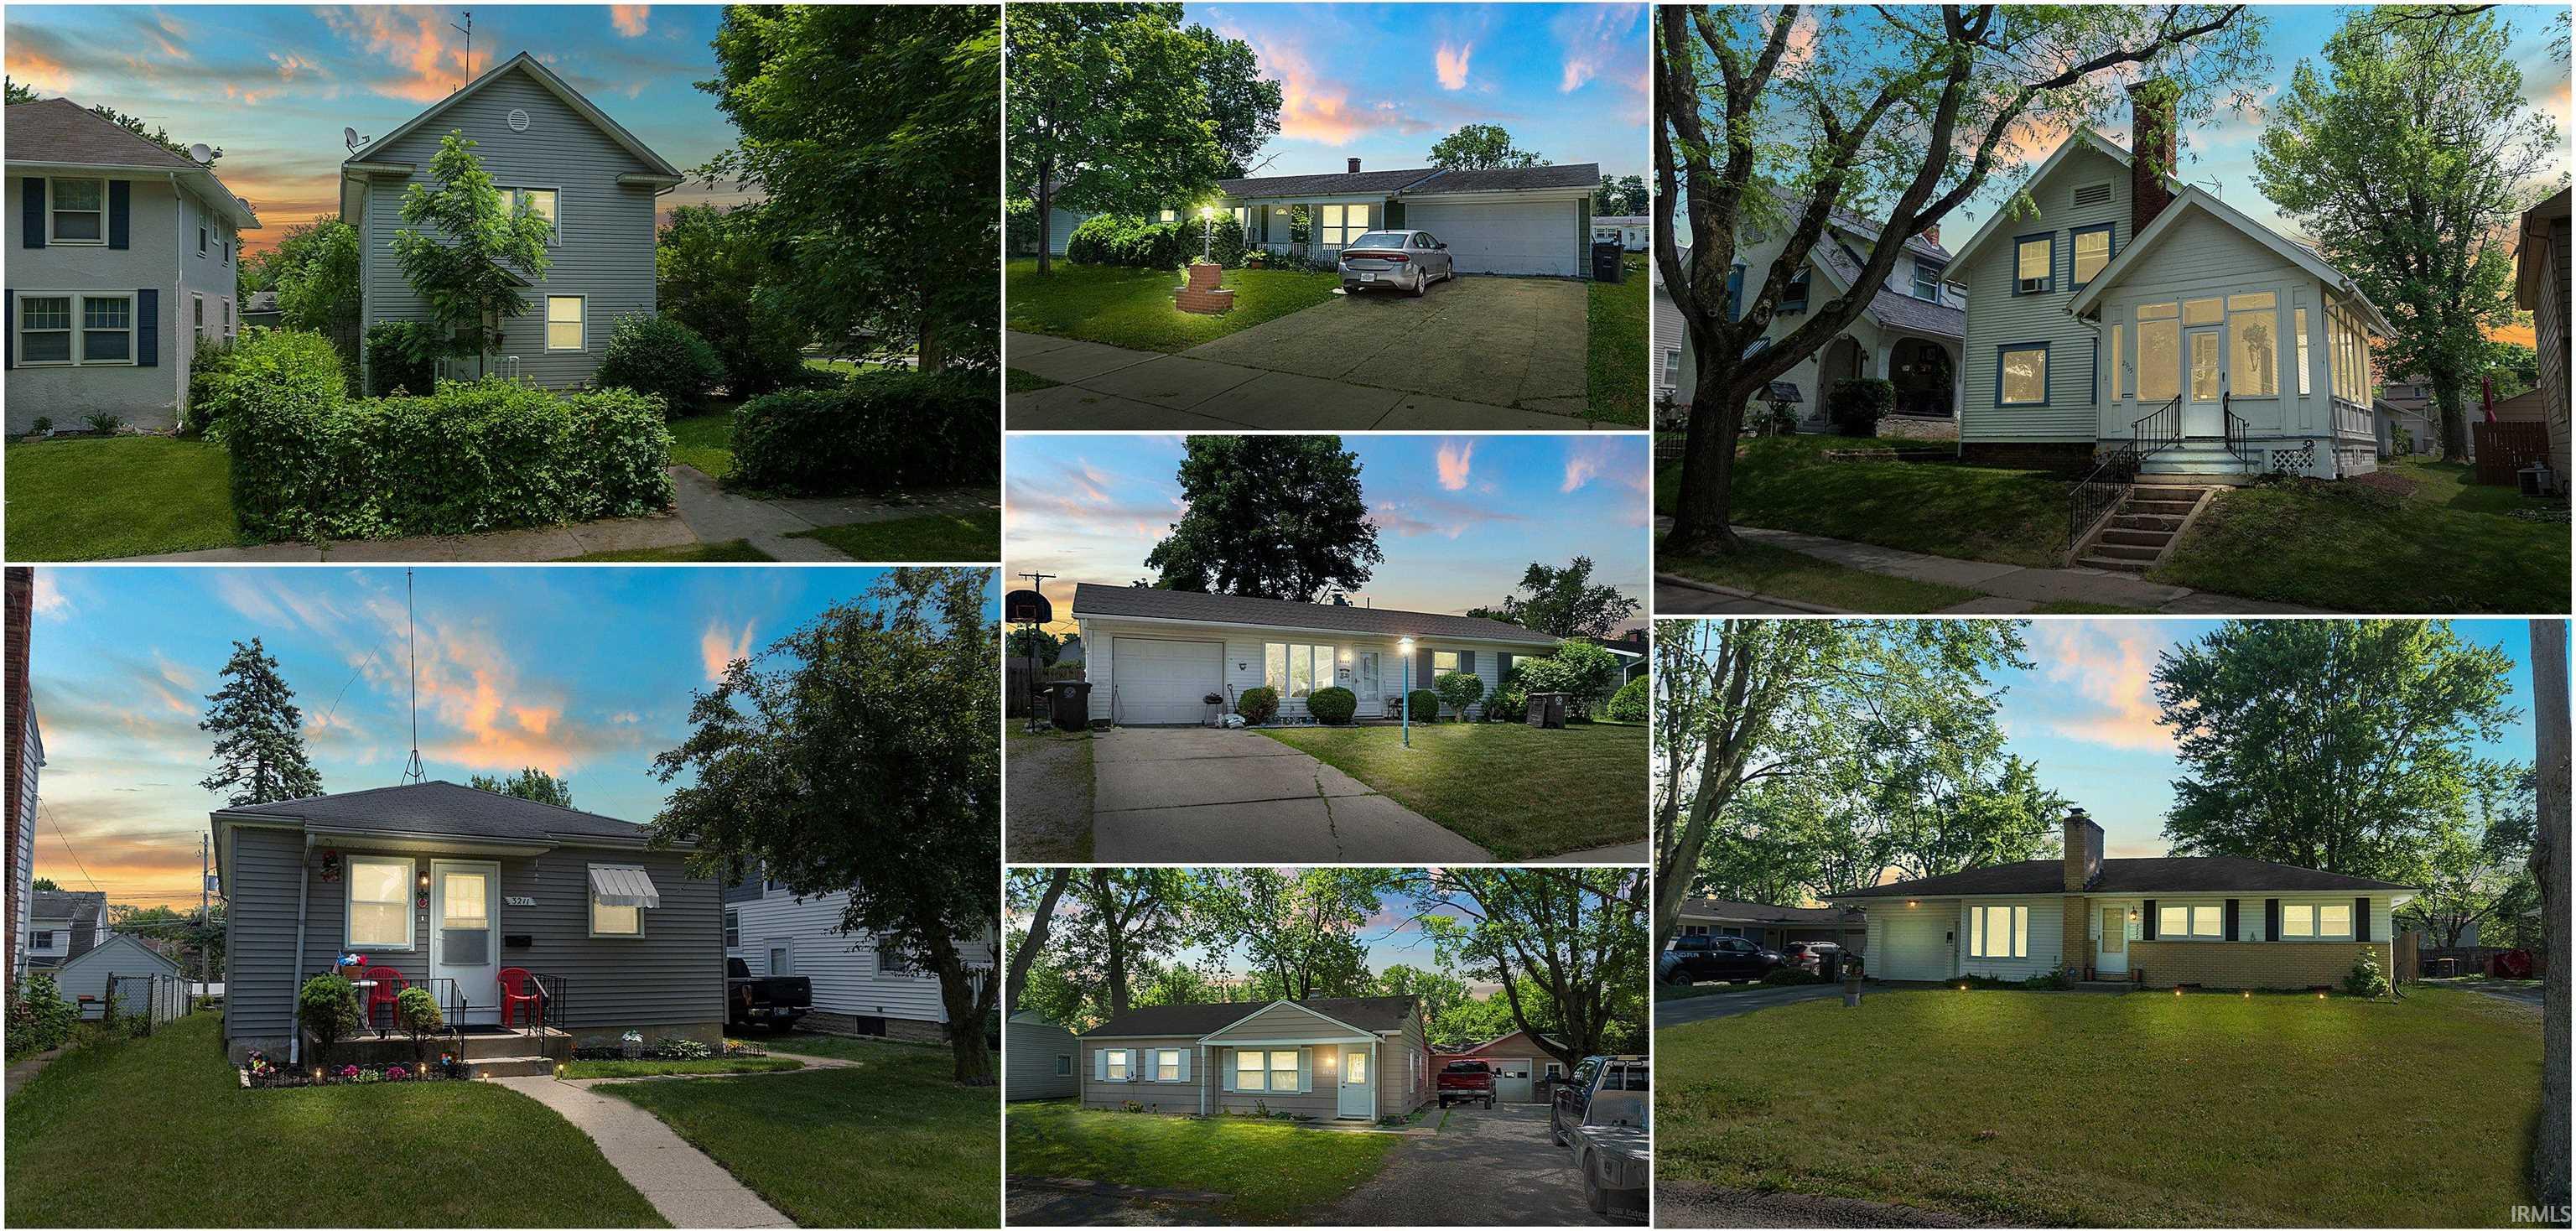 This property is one of 20 single family homes in a package for sale. All 20 properties must be purchased as a unit (see additional properties below).             One of northern Indiana's most reputable property management companies is offering 20 of their best single family homes that are currently 100% occupied/rented. Don't miss out on this investment opportunity with current and immediate cash flow and income. All properties managed by this company are updated and meticulously maintained.  Addresses included in the sale: 2219 24th Ave 46802, 4316 Alverado Dr 46816, 4320 Alverado Dr 46816, 342 Arcadia Ct 46807, 302 E Branning Ave 46806, 6411 Bristol Rd 46816, 125 Burns Blvd 46807, 6311 Chatham Dr 46816, 1708 Cherokee Rd 46808, 6314 Downtingtown Dr 46816, 5026 Hessen Cassel Rd 46806, 5221 Riviera Dr 46825, 5025 Salem Ln 46806, 3002 Schaper Dr 46806, 2214 Vance Ave 46805, 545 Kinnaird Ave 46807, 3027 Hoagland Ave 46807, 3211 Hoagland Ave 46807, 2915 Shawnee Dr 46807.